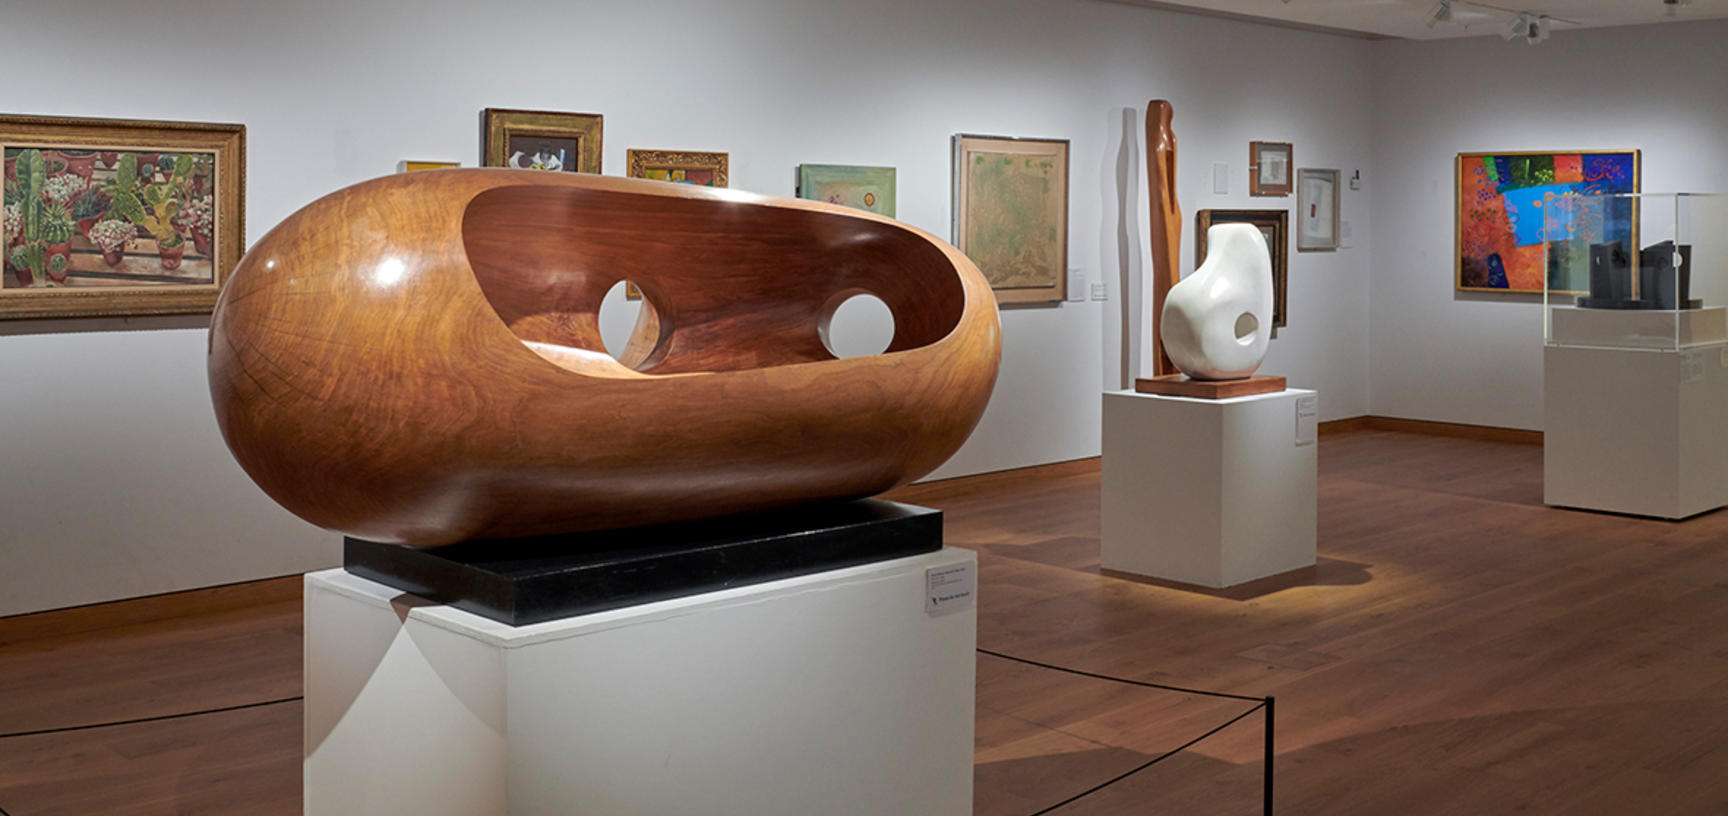 The Modern Art Gallery at the Ashmolean Museum in 2019